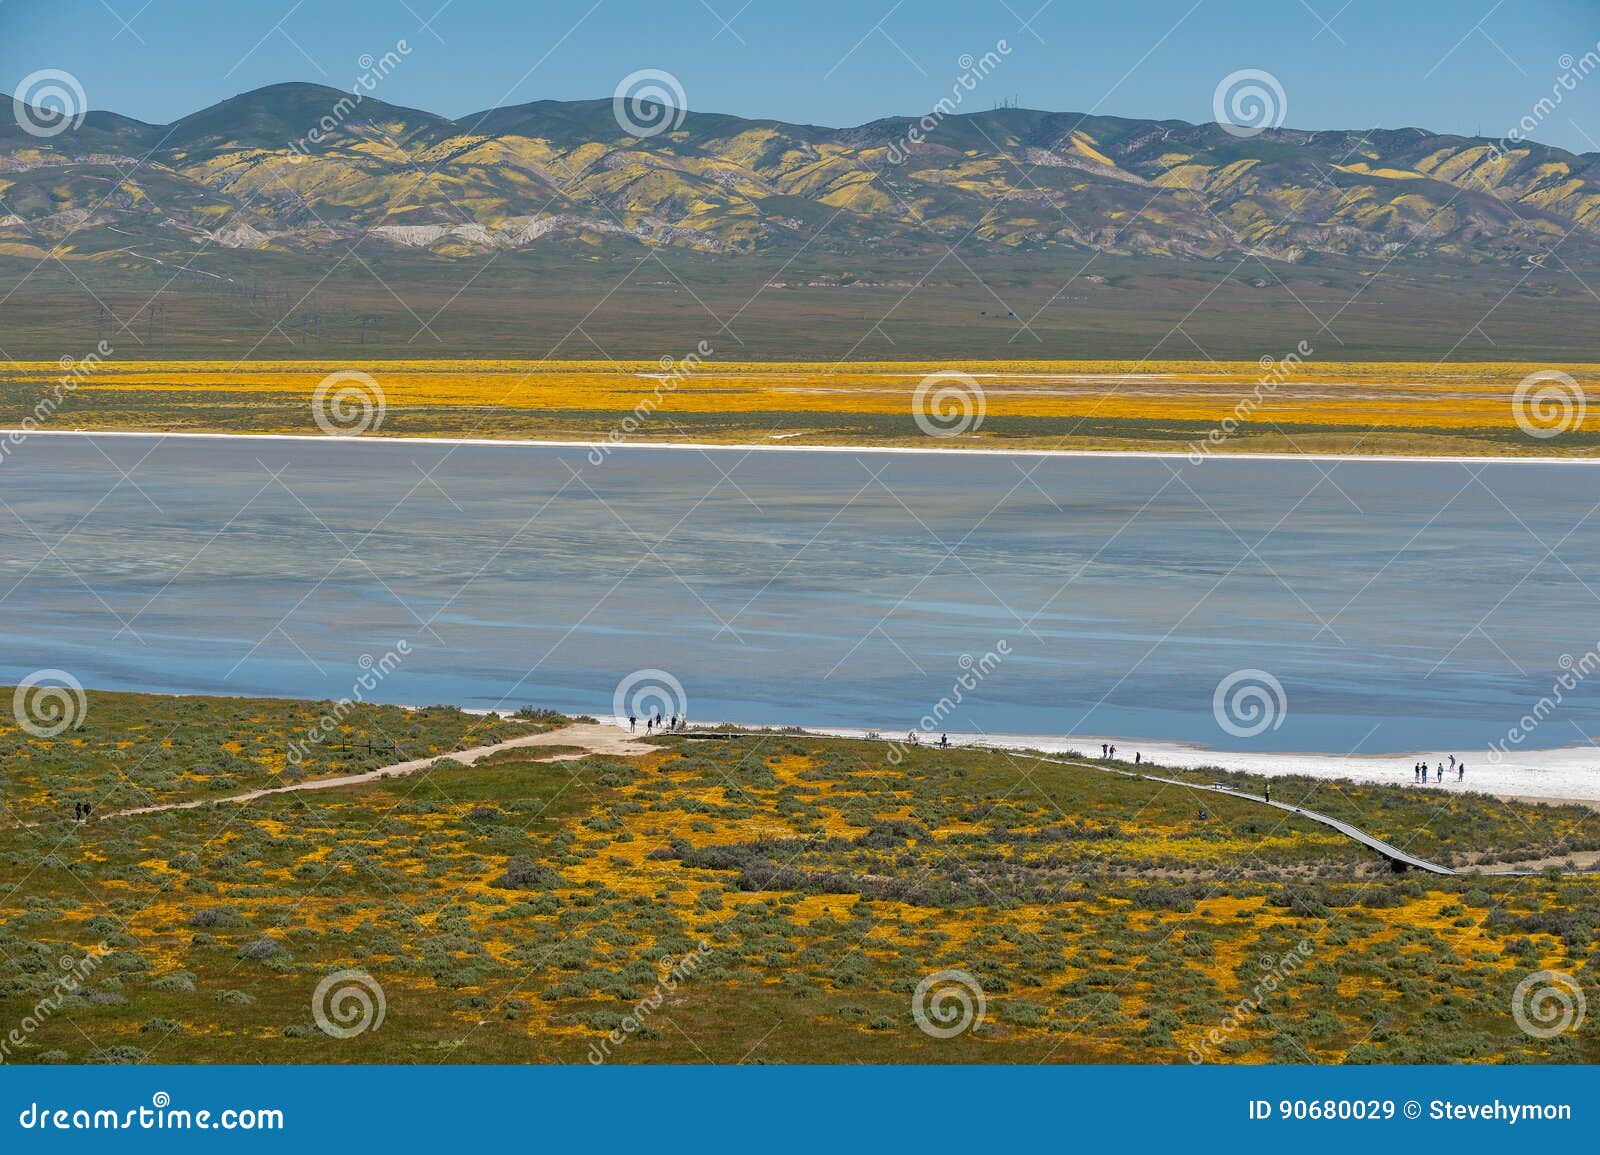 wildflower bloom at carrizo plain national monument